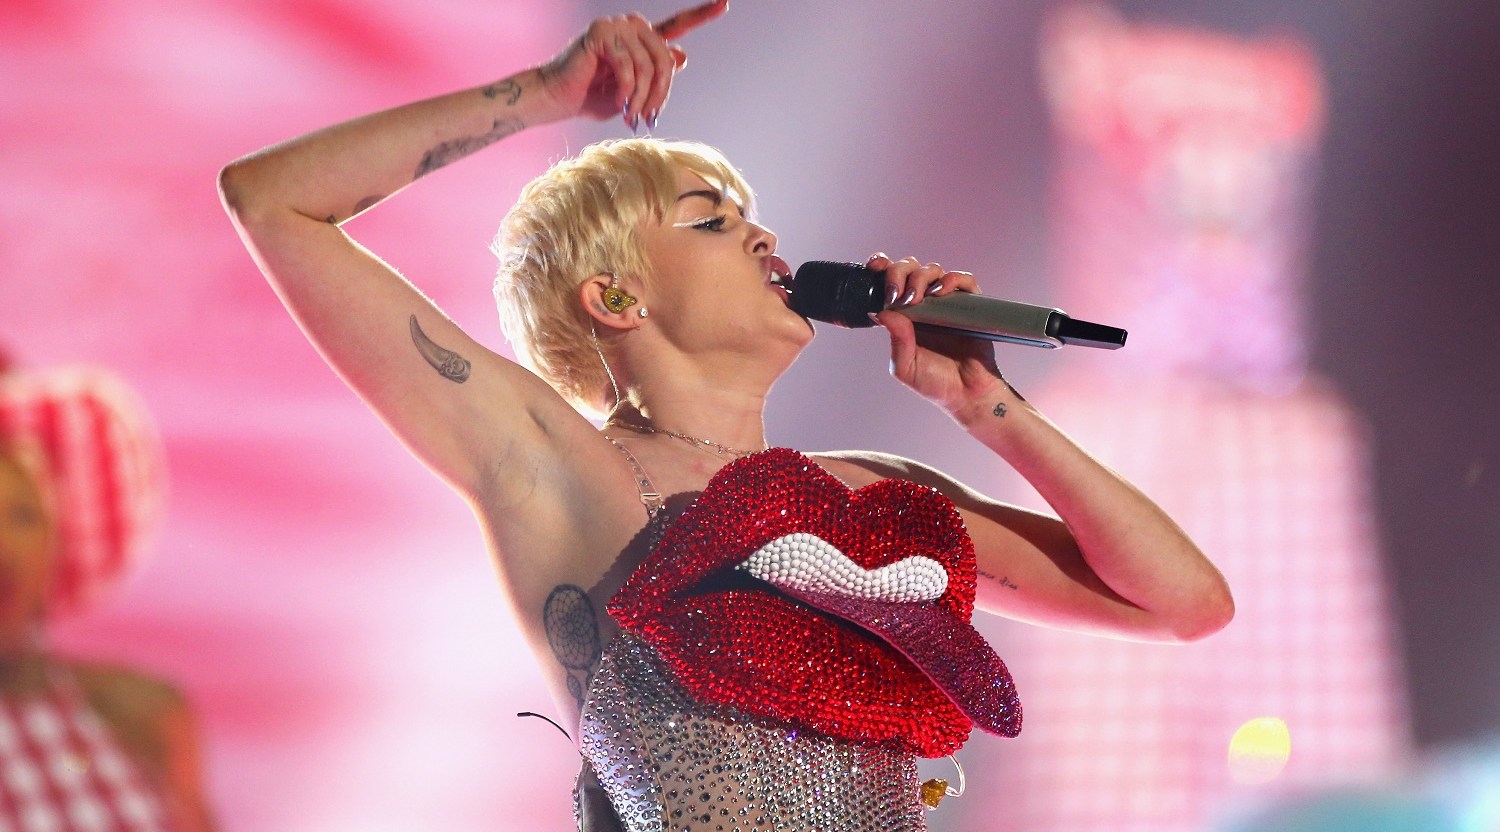 Miley Cyrus Having Lesbian Sex - This perfect Miley Cyrus performance smashes gender boundaries (VIDEO) |  PinkNews